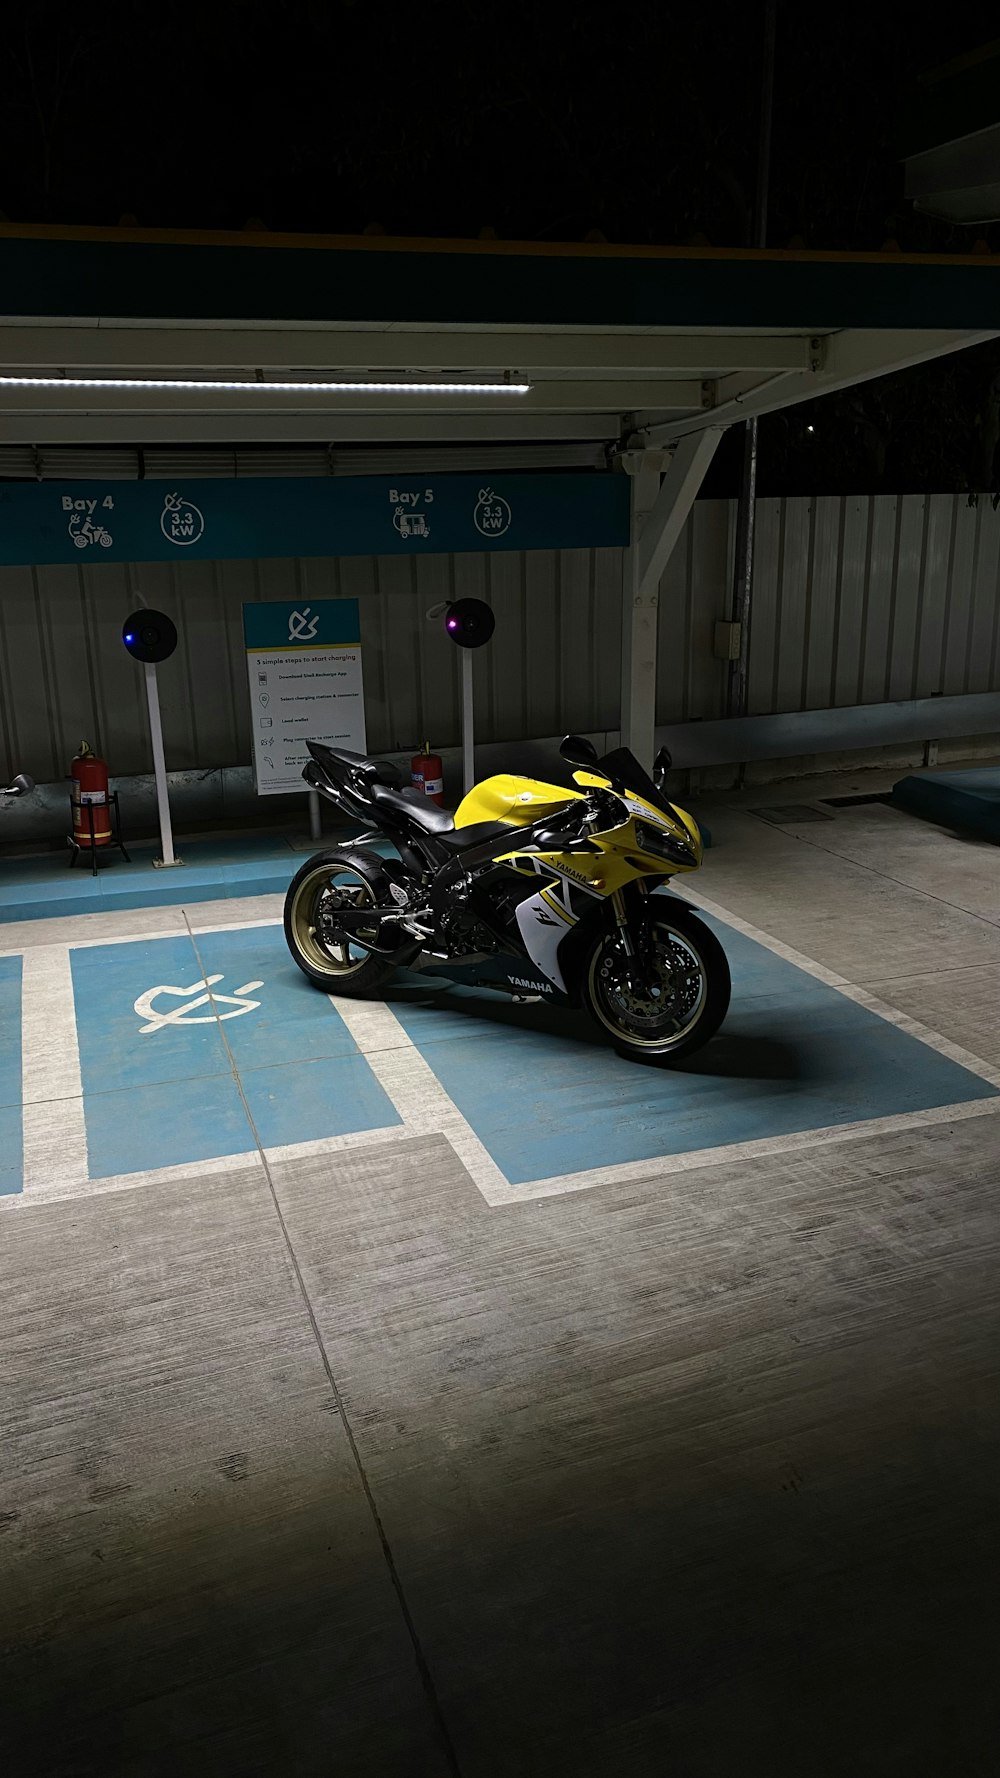 a yellow and black motorcycle parked in a parking lot